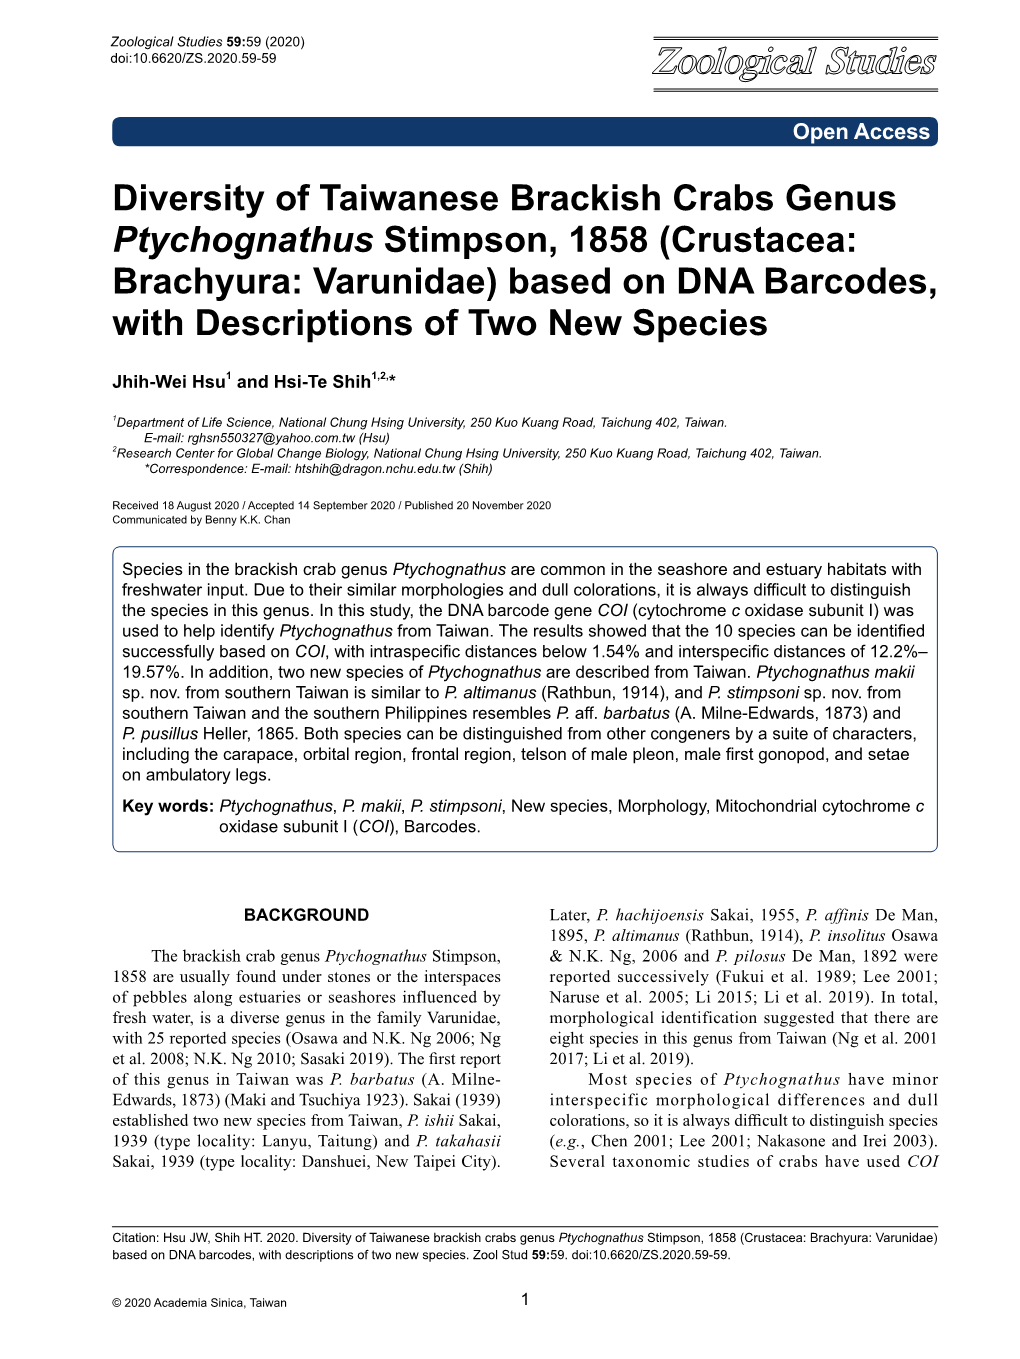 Diversity of Taiwanese Brackish Crabs Genus Ptychognathus Stimpson, 1858 (Crustacea: Brachyura: Varunidae) Based on DNA Barcodes, with Descriptions of Two New Species